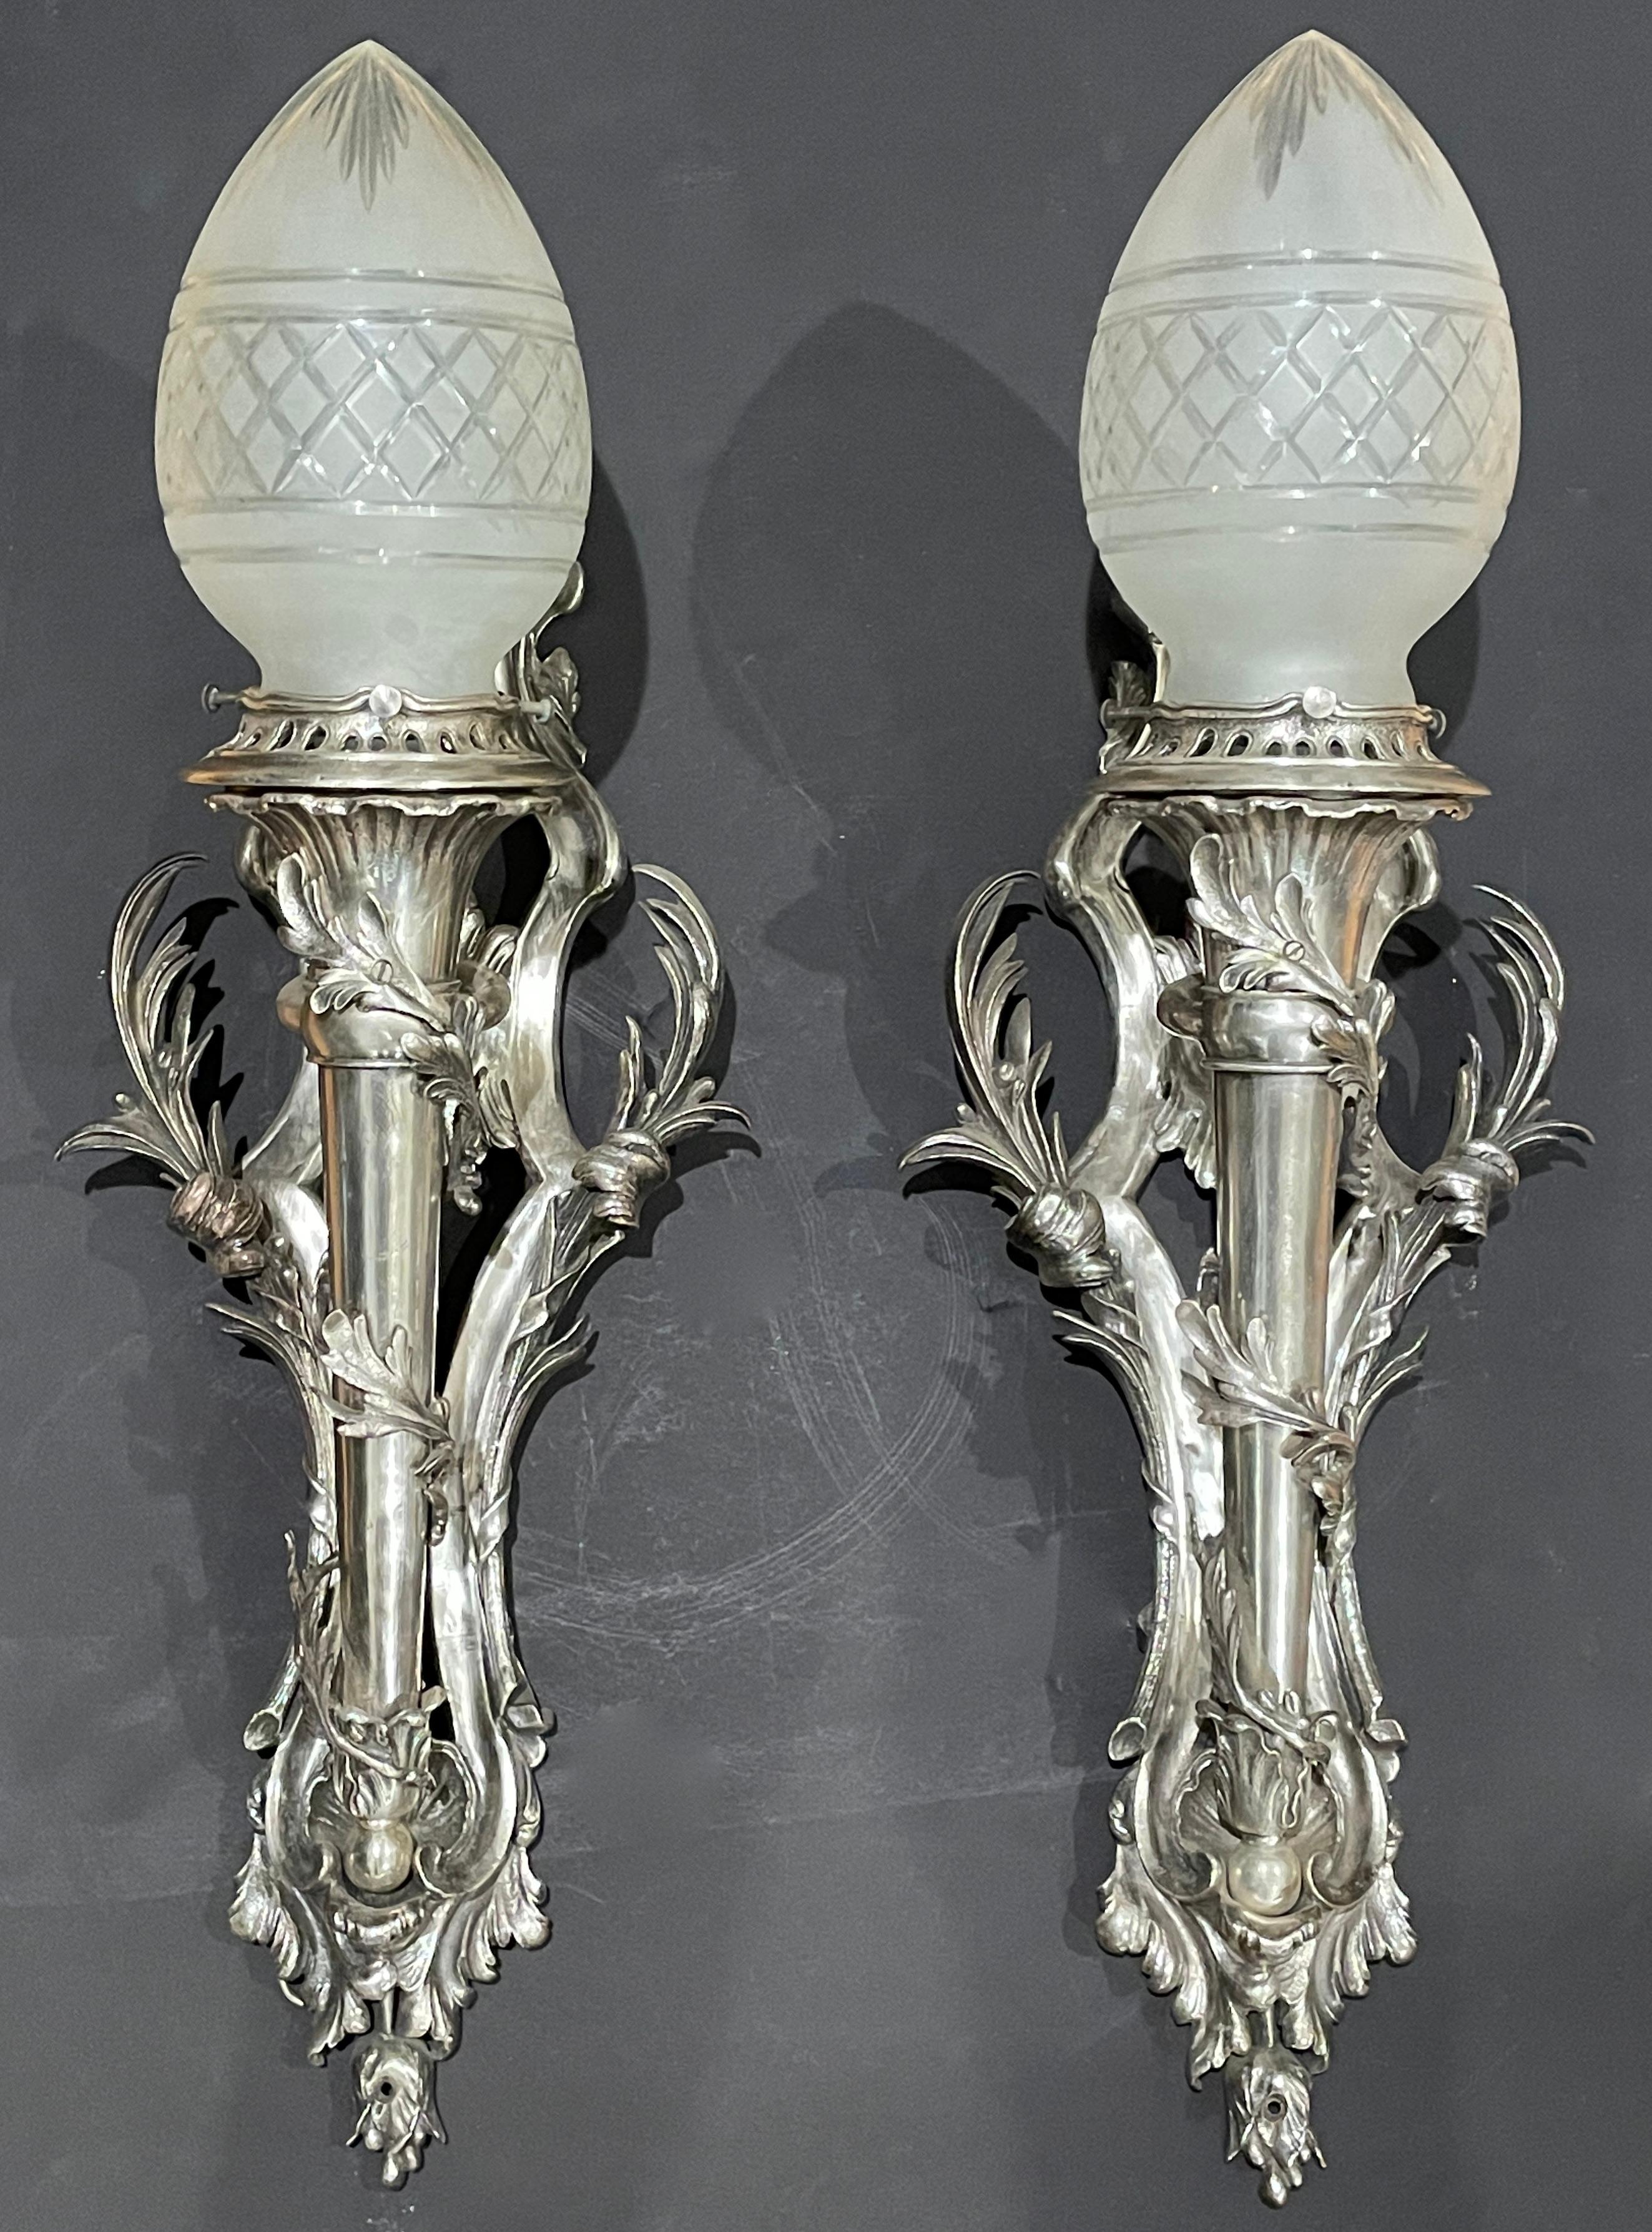 Fine quality silver over bronze Louis XV style wall sconces with frosted cut to clear torch form glass globes. Wall torchiere form sconces recently rewired with a projection of 10